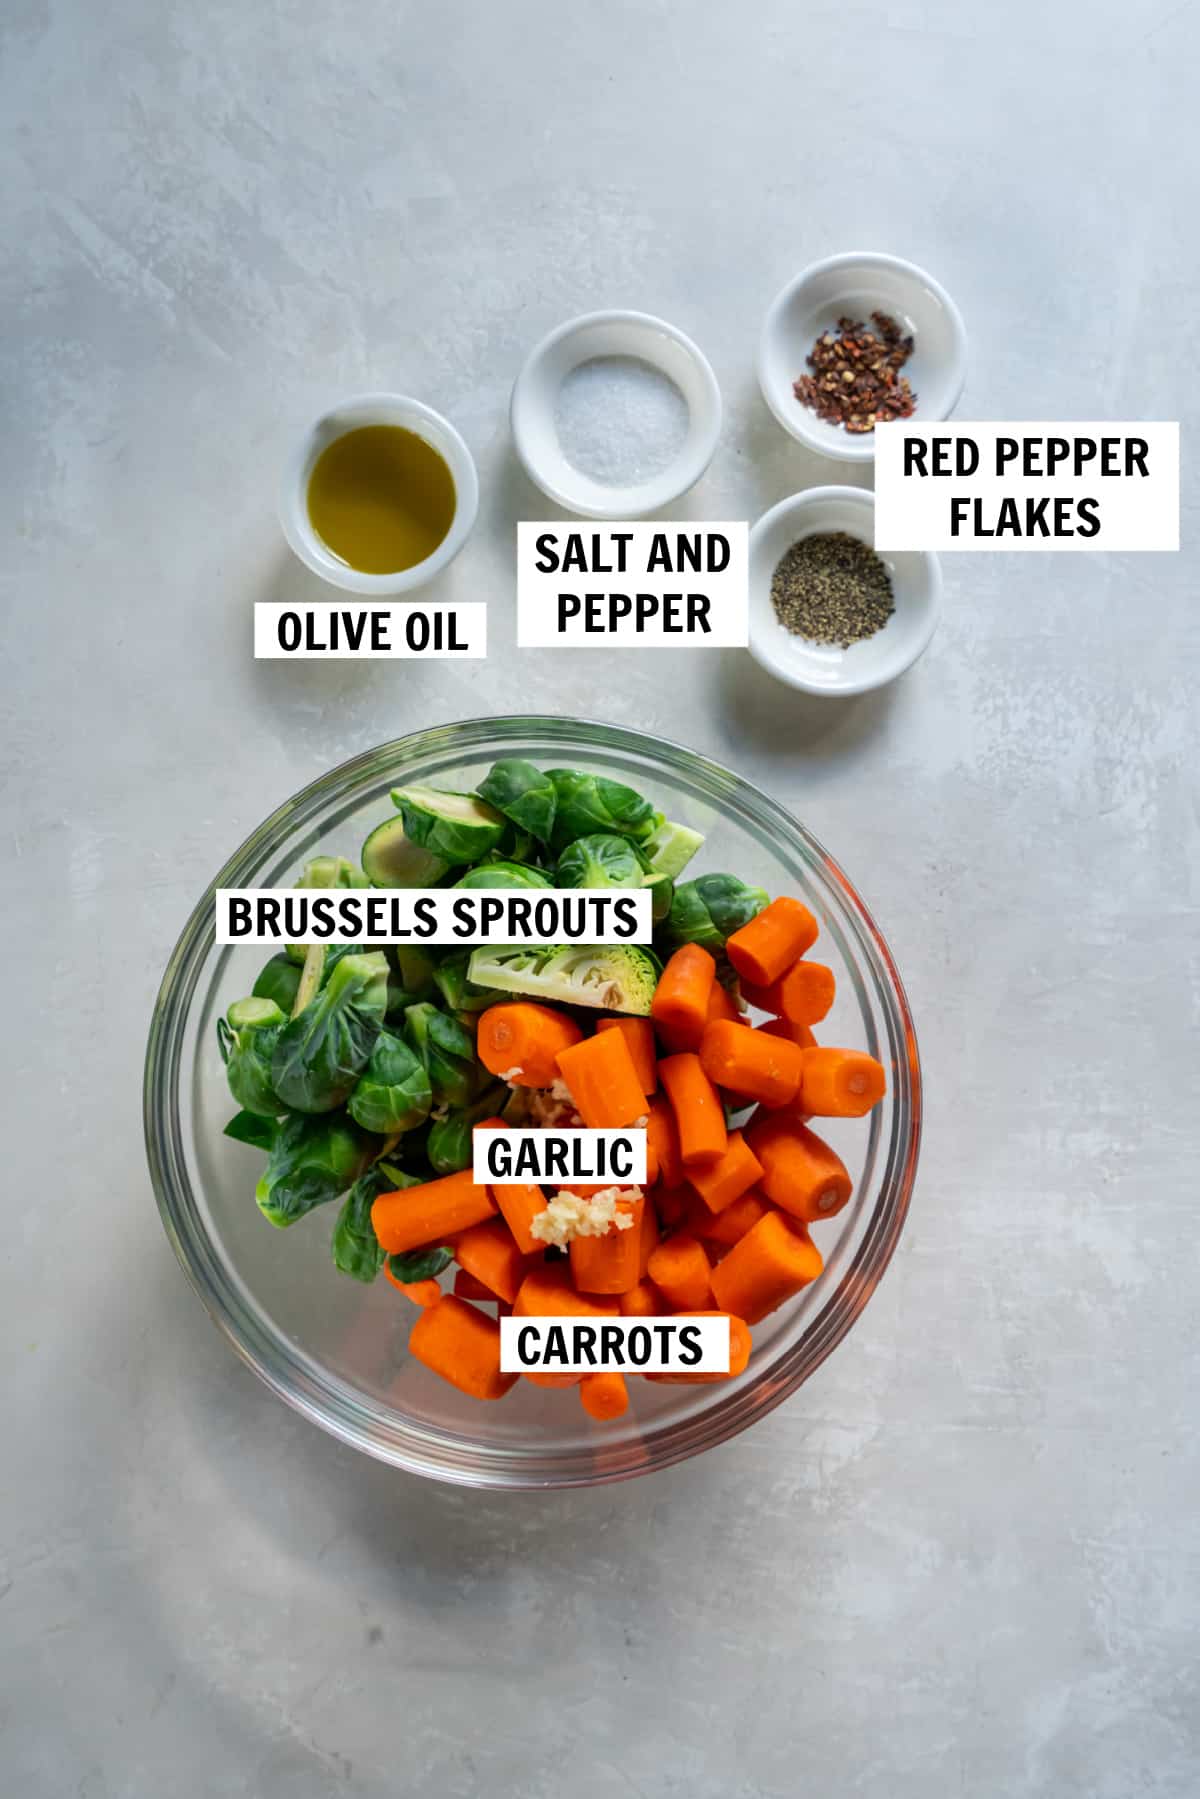 All of the ingredients for roasted brussels sprouts and carrots in bowls on a white countertop including fresh brussels sprouts, fresh cut carrots, minced garlic, olive oil, sea salt, black pepper and red pepper flakes.